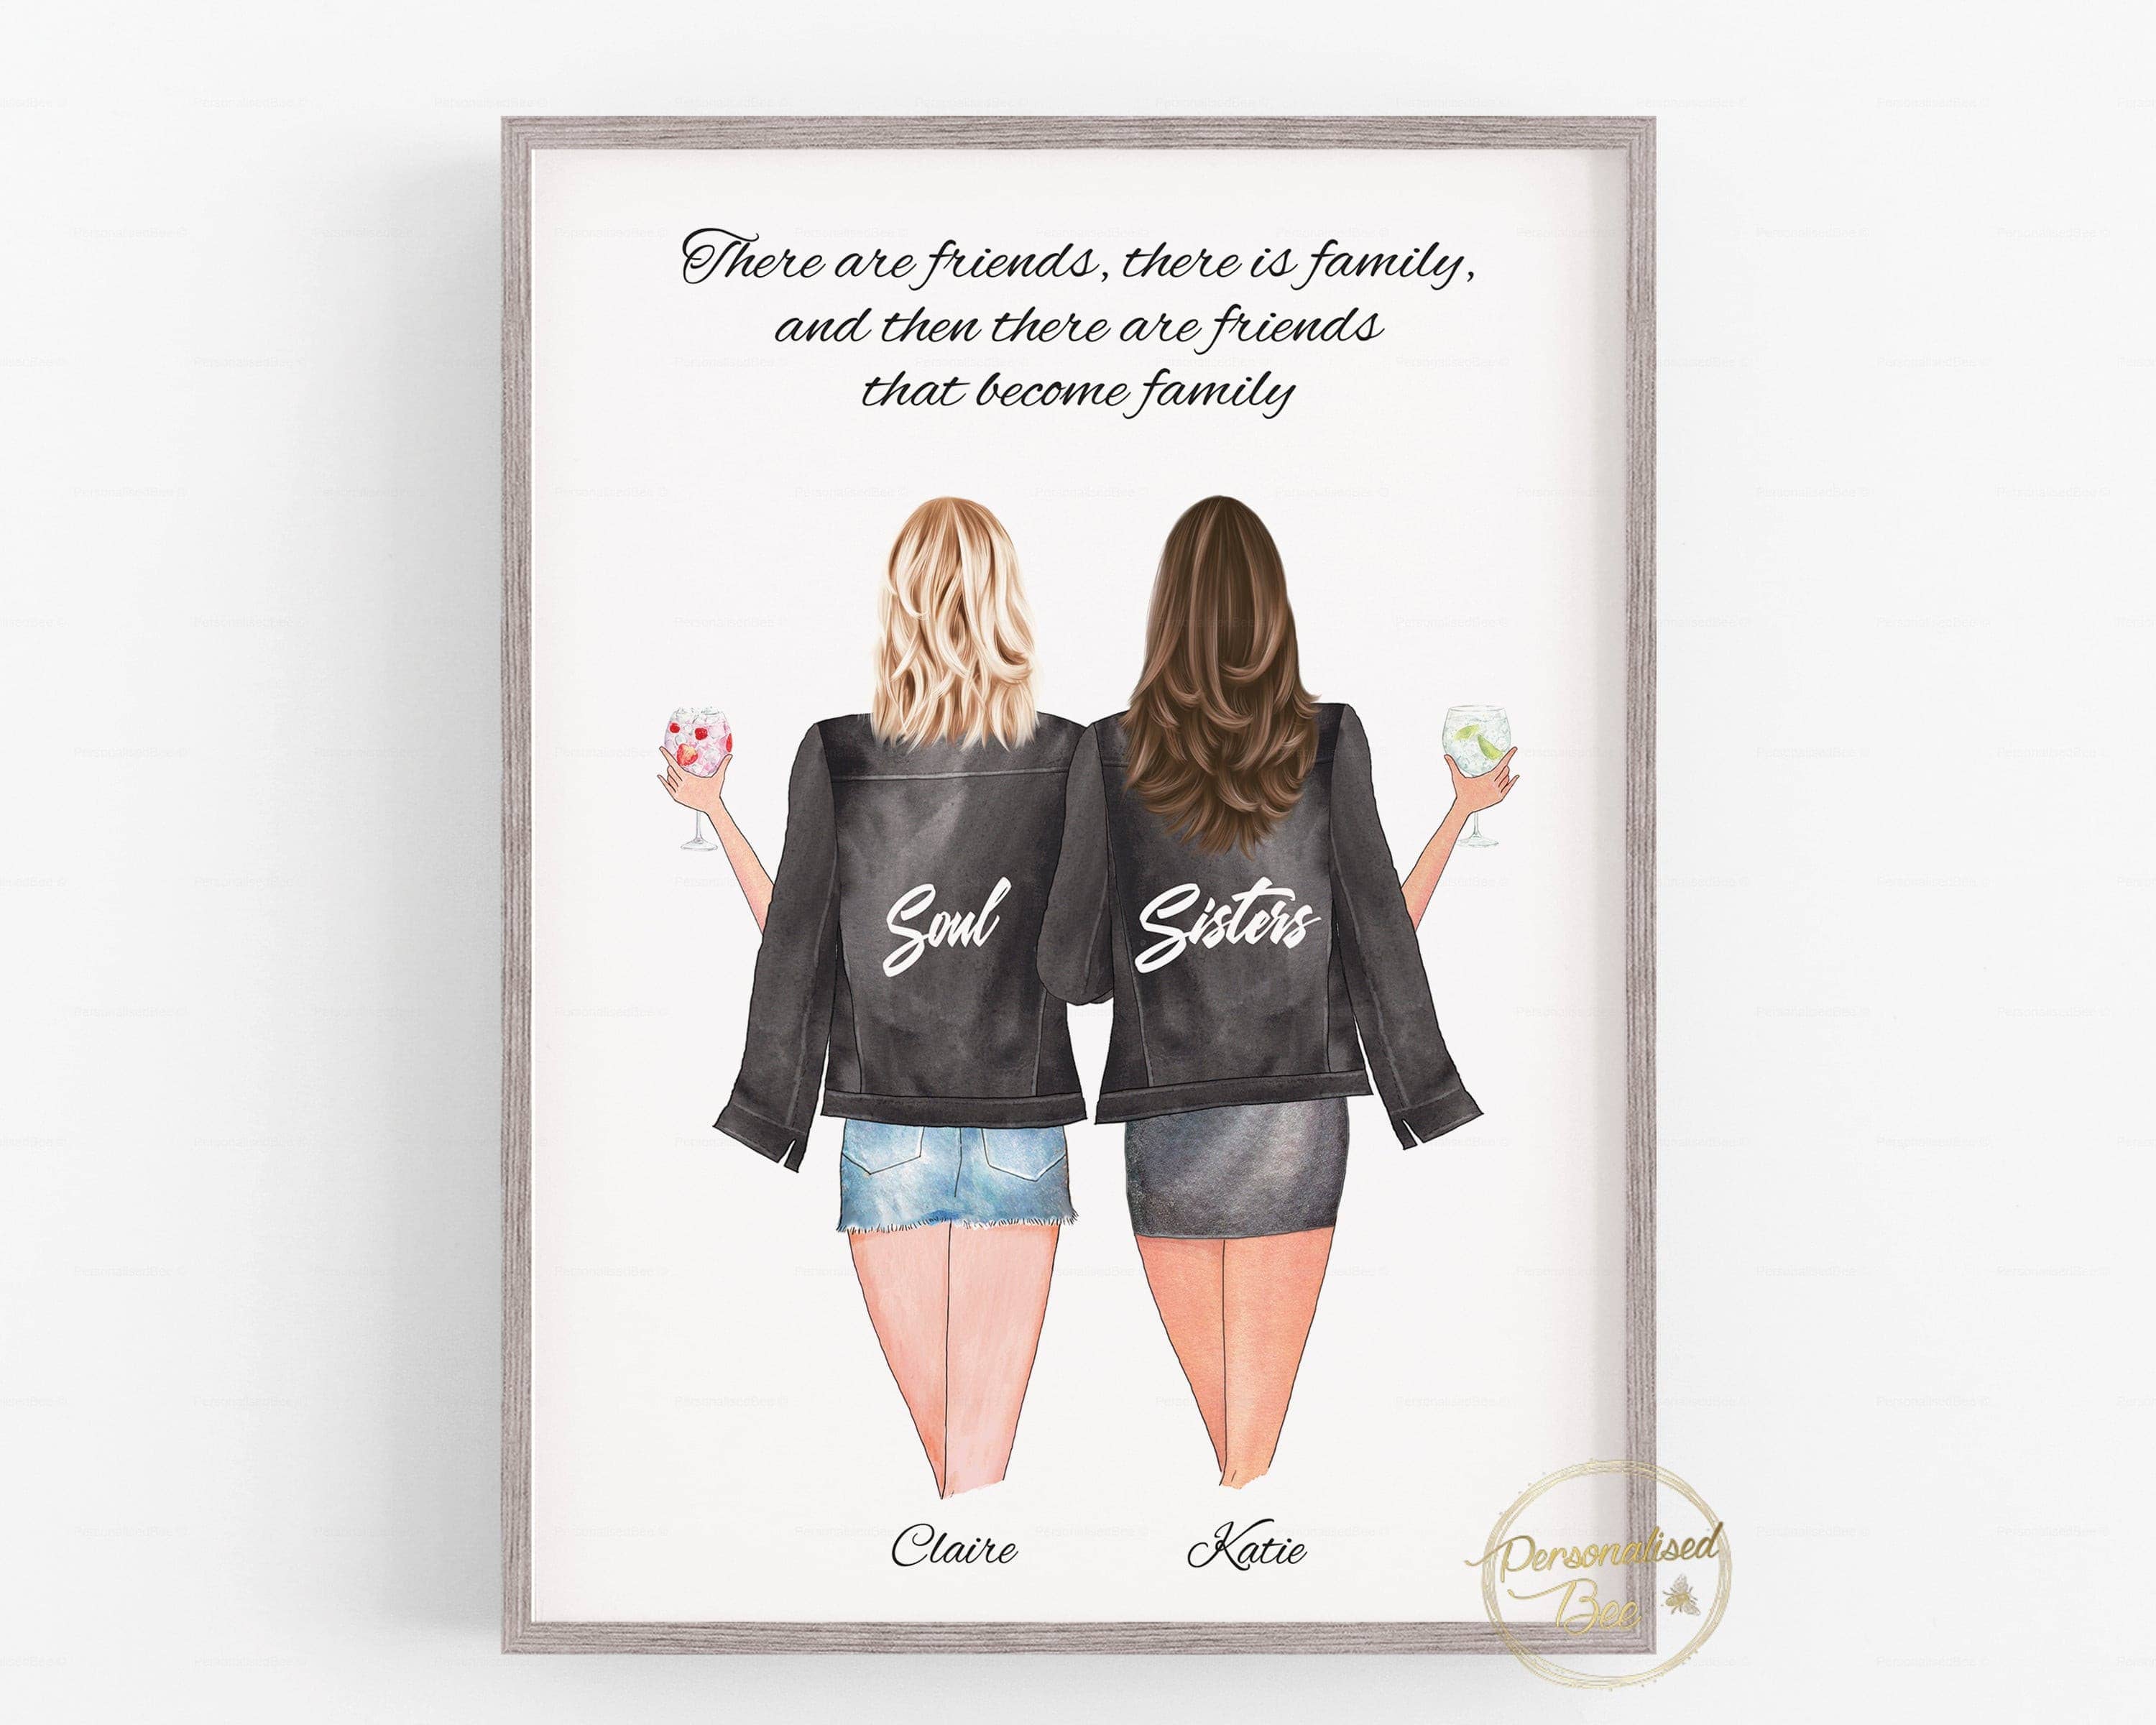 Friendship Print - Personalised 2 Friends Illustration - There are Friends, there is Family quote.